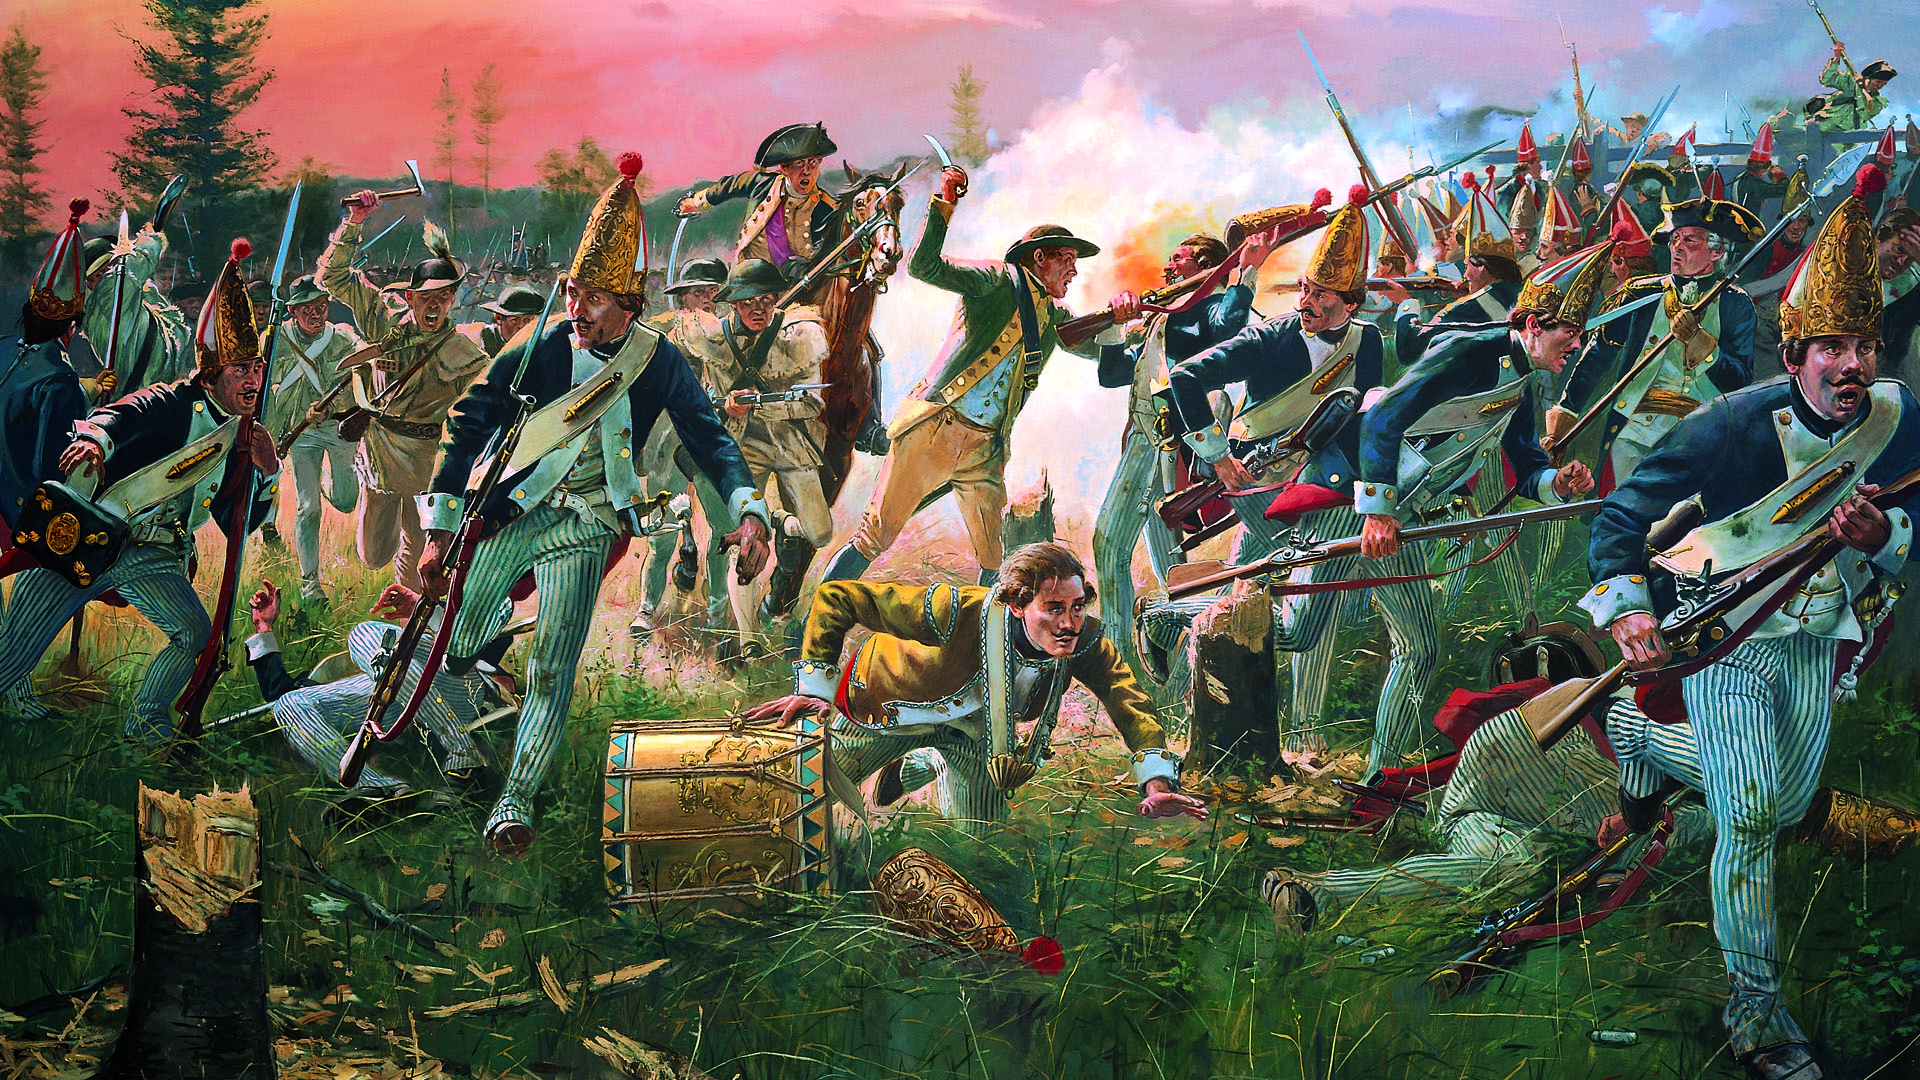 Under General Benedict Arnold, Patriot forces drive off Hessian mercenaries at Breyman’s Redoubt during the Battle of Saratoga.